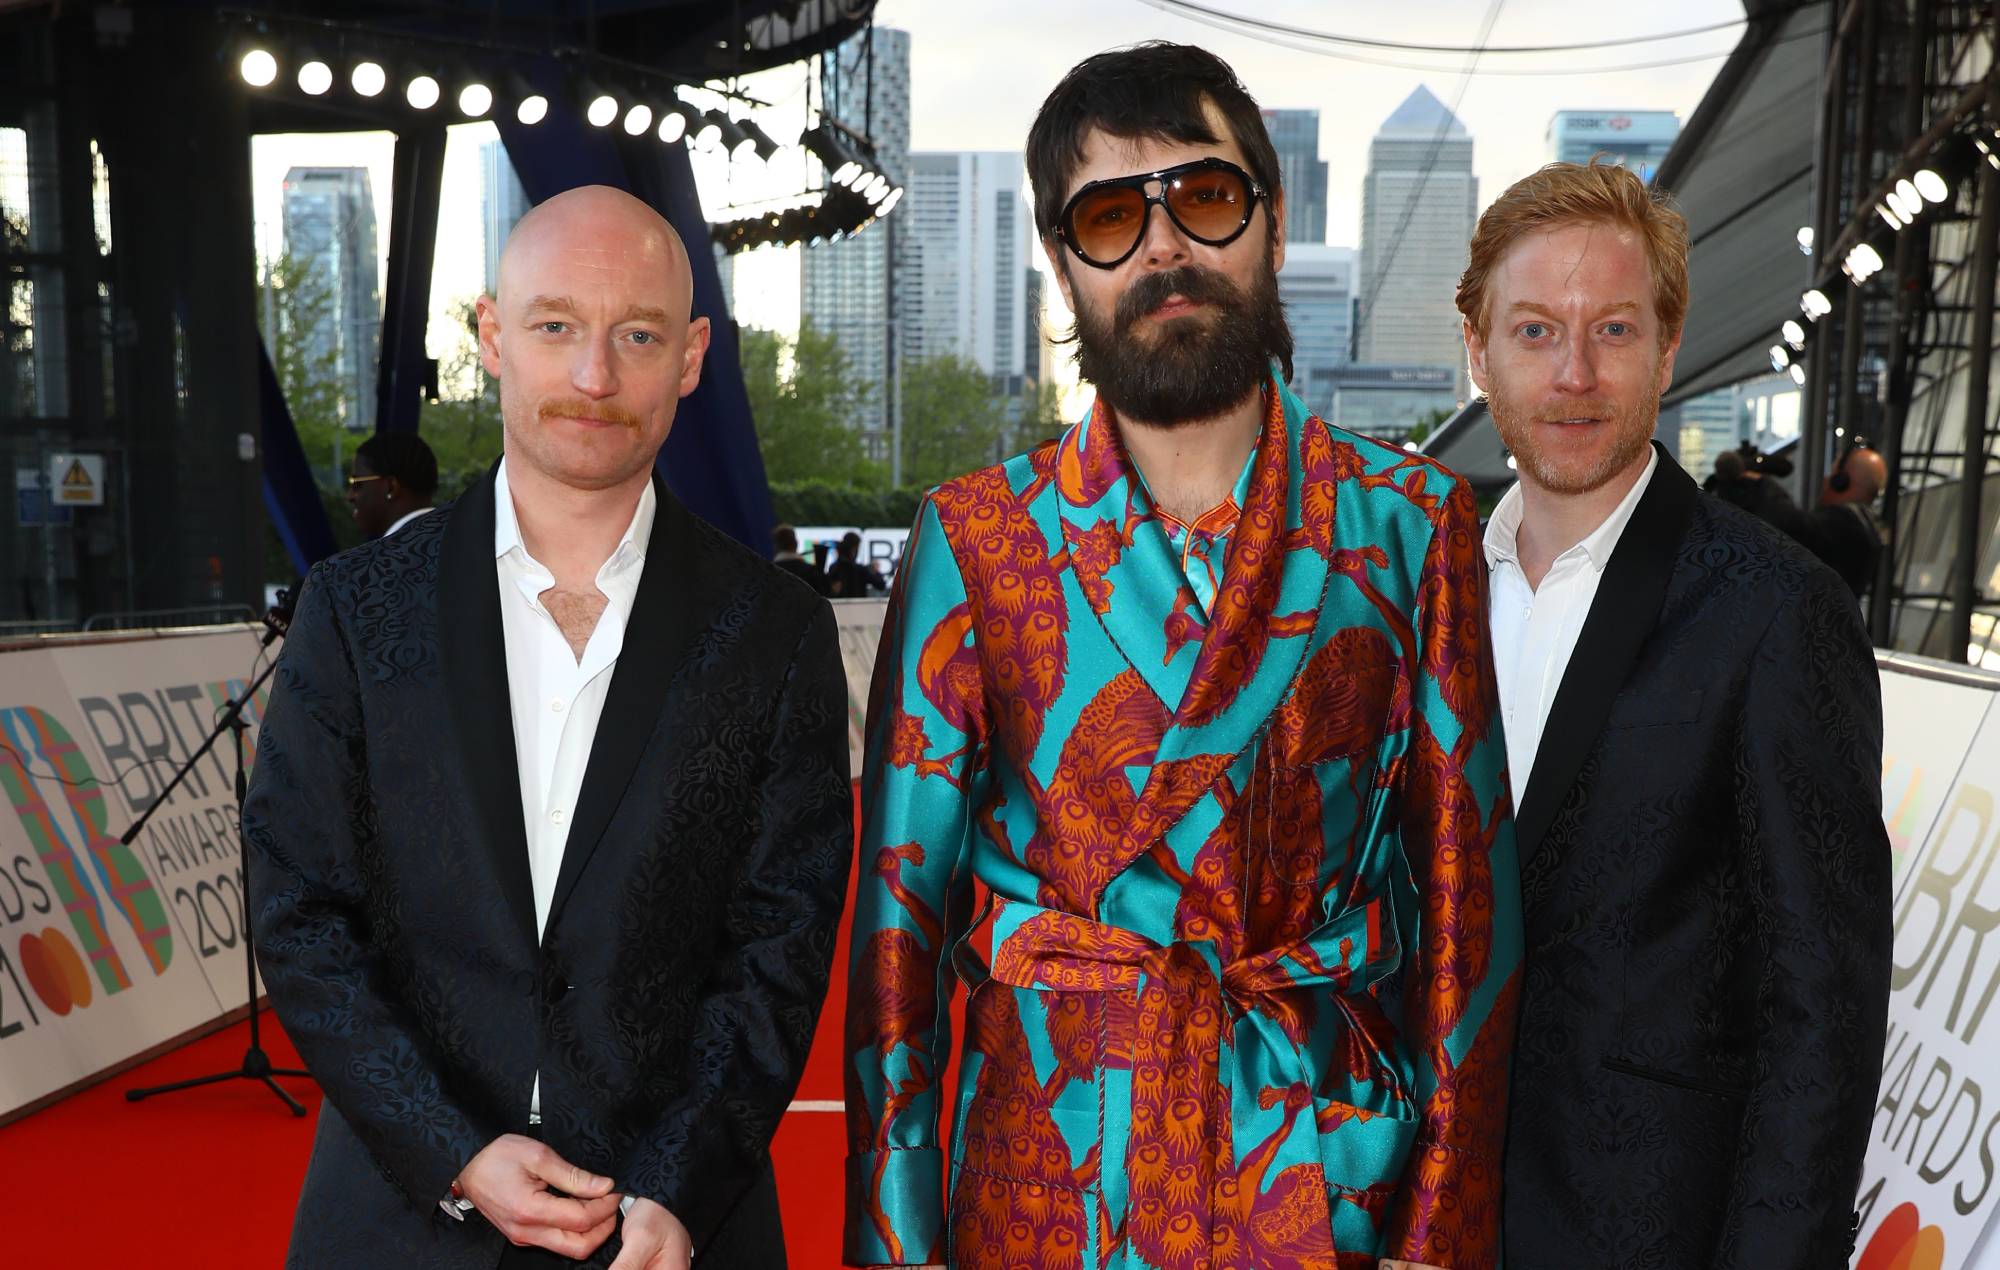 Biffy Clyro: “We literally finished our new album last week”